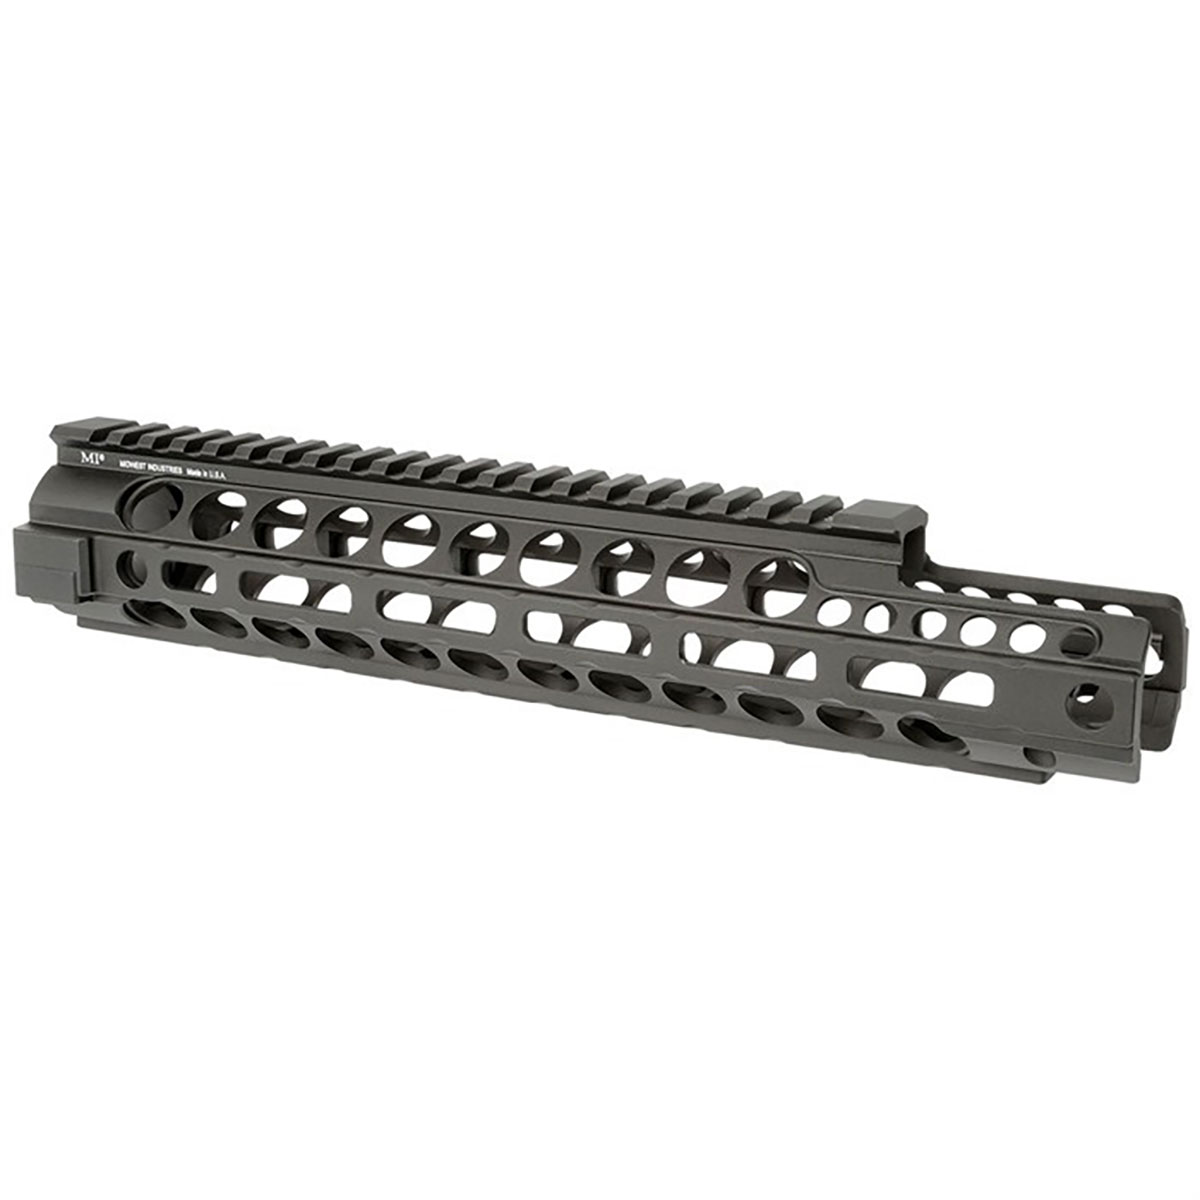 MIDWEST INDUSTRIES, INC. TWO PIECE EXTENDED HANDGUARDS FREE FLOAT M-LOK